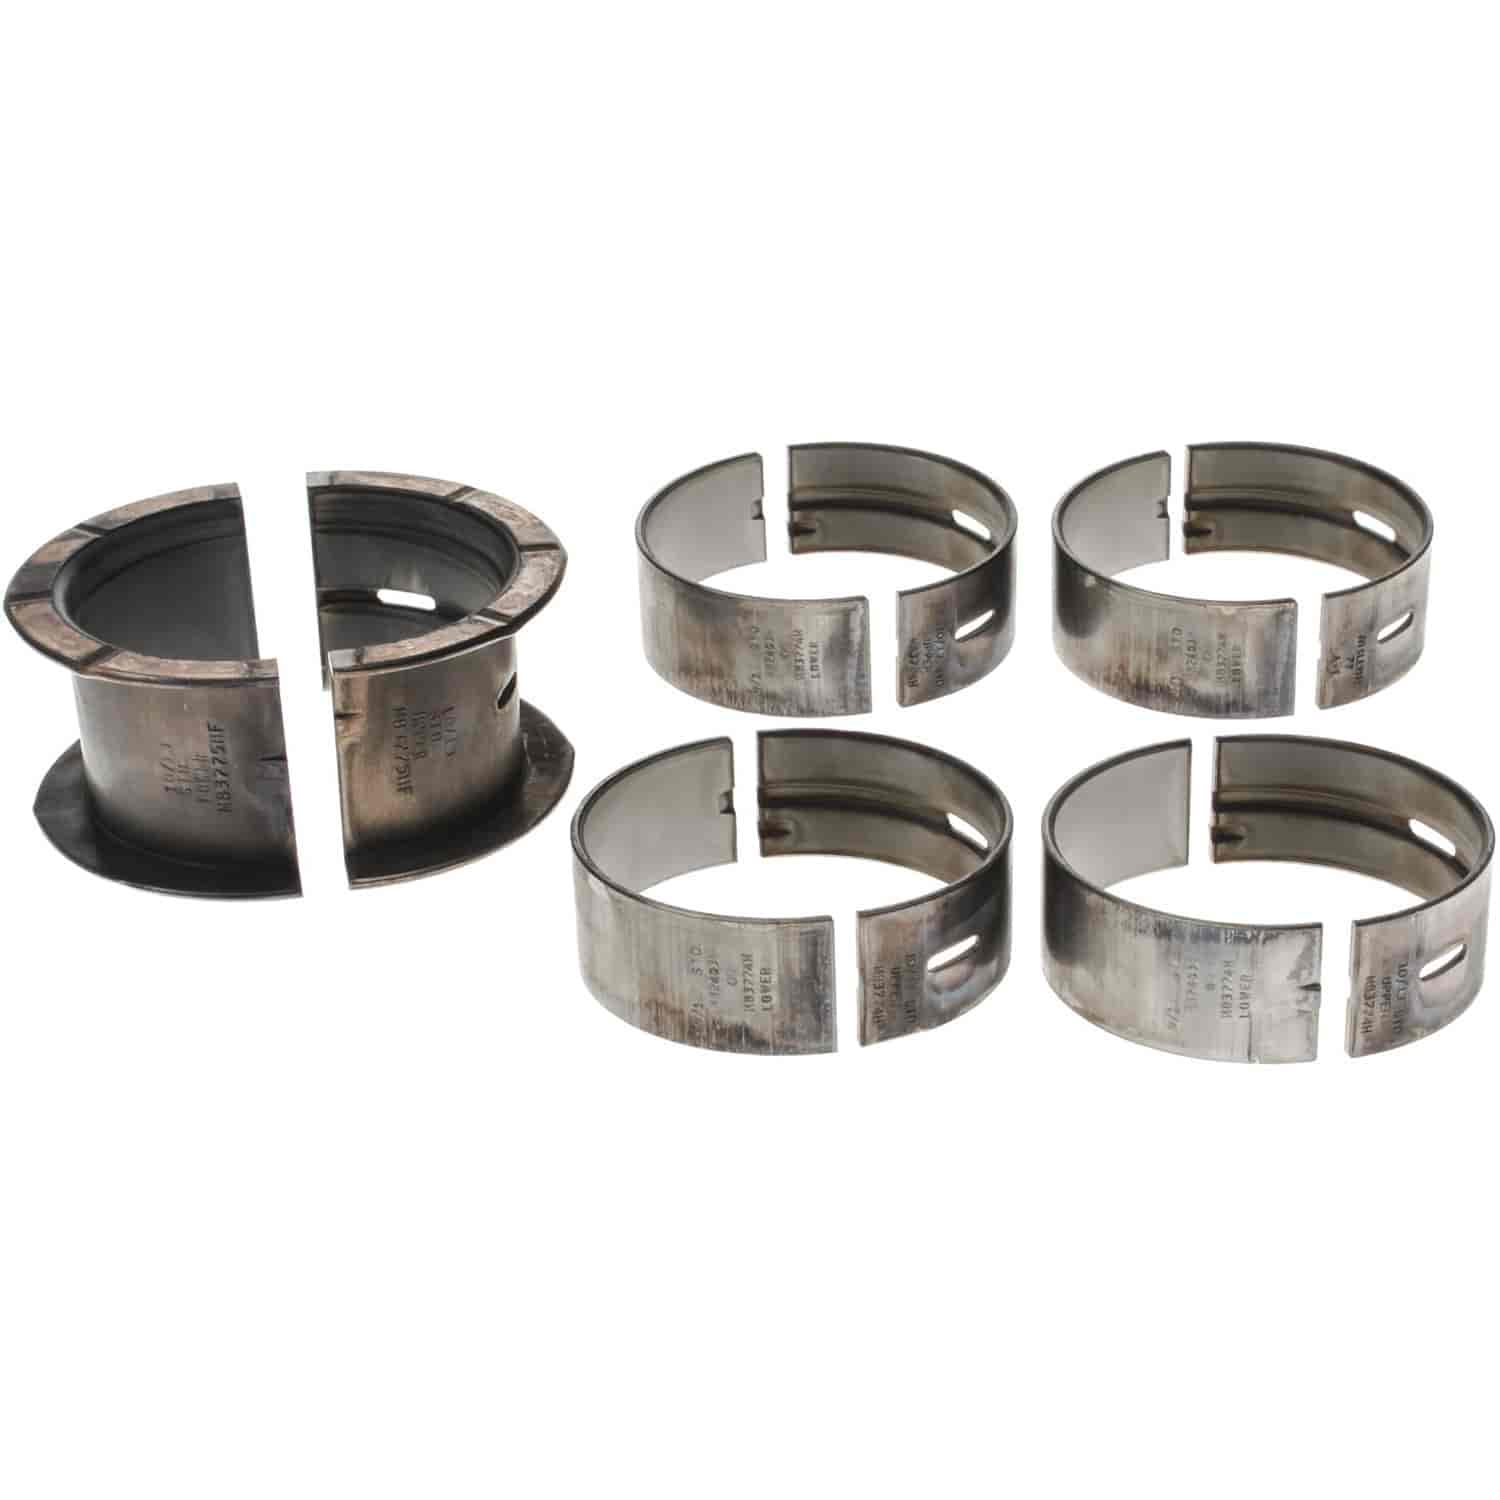 Main Bearing Set Chevy 2001-2007 V8 496 (8.1L) with Standard Size